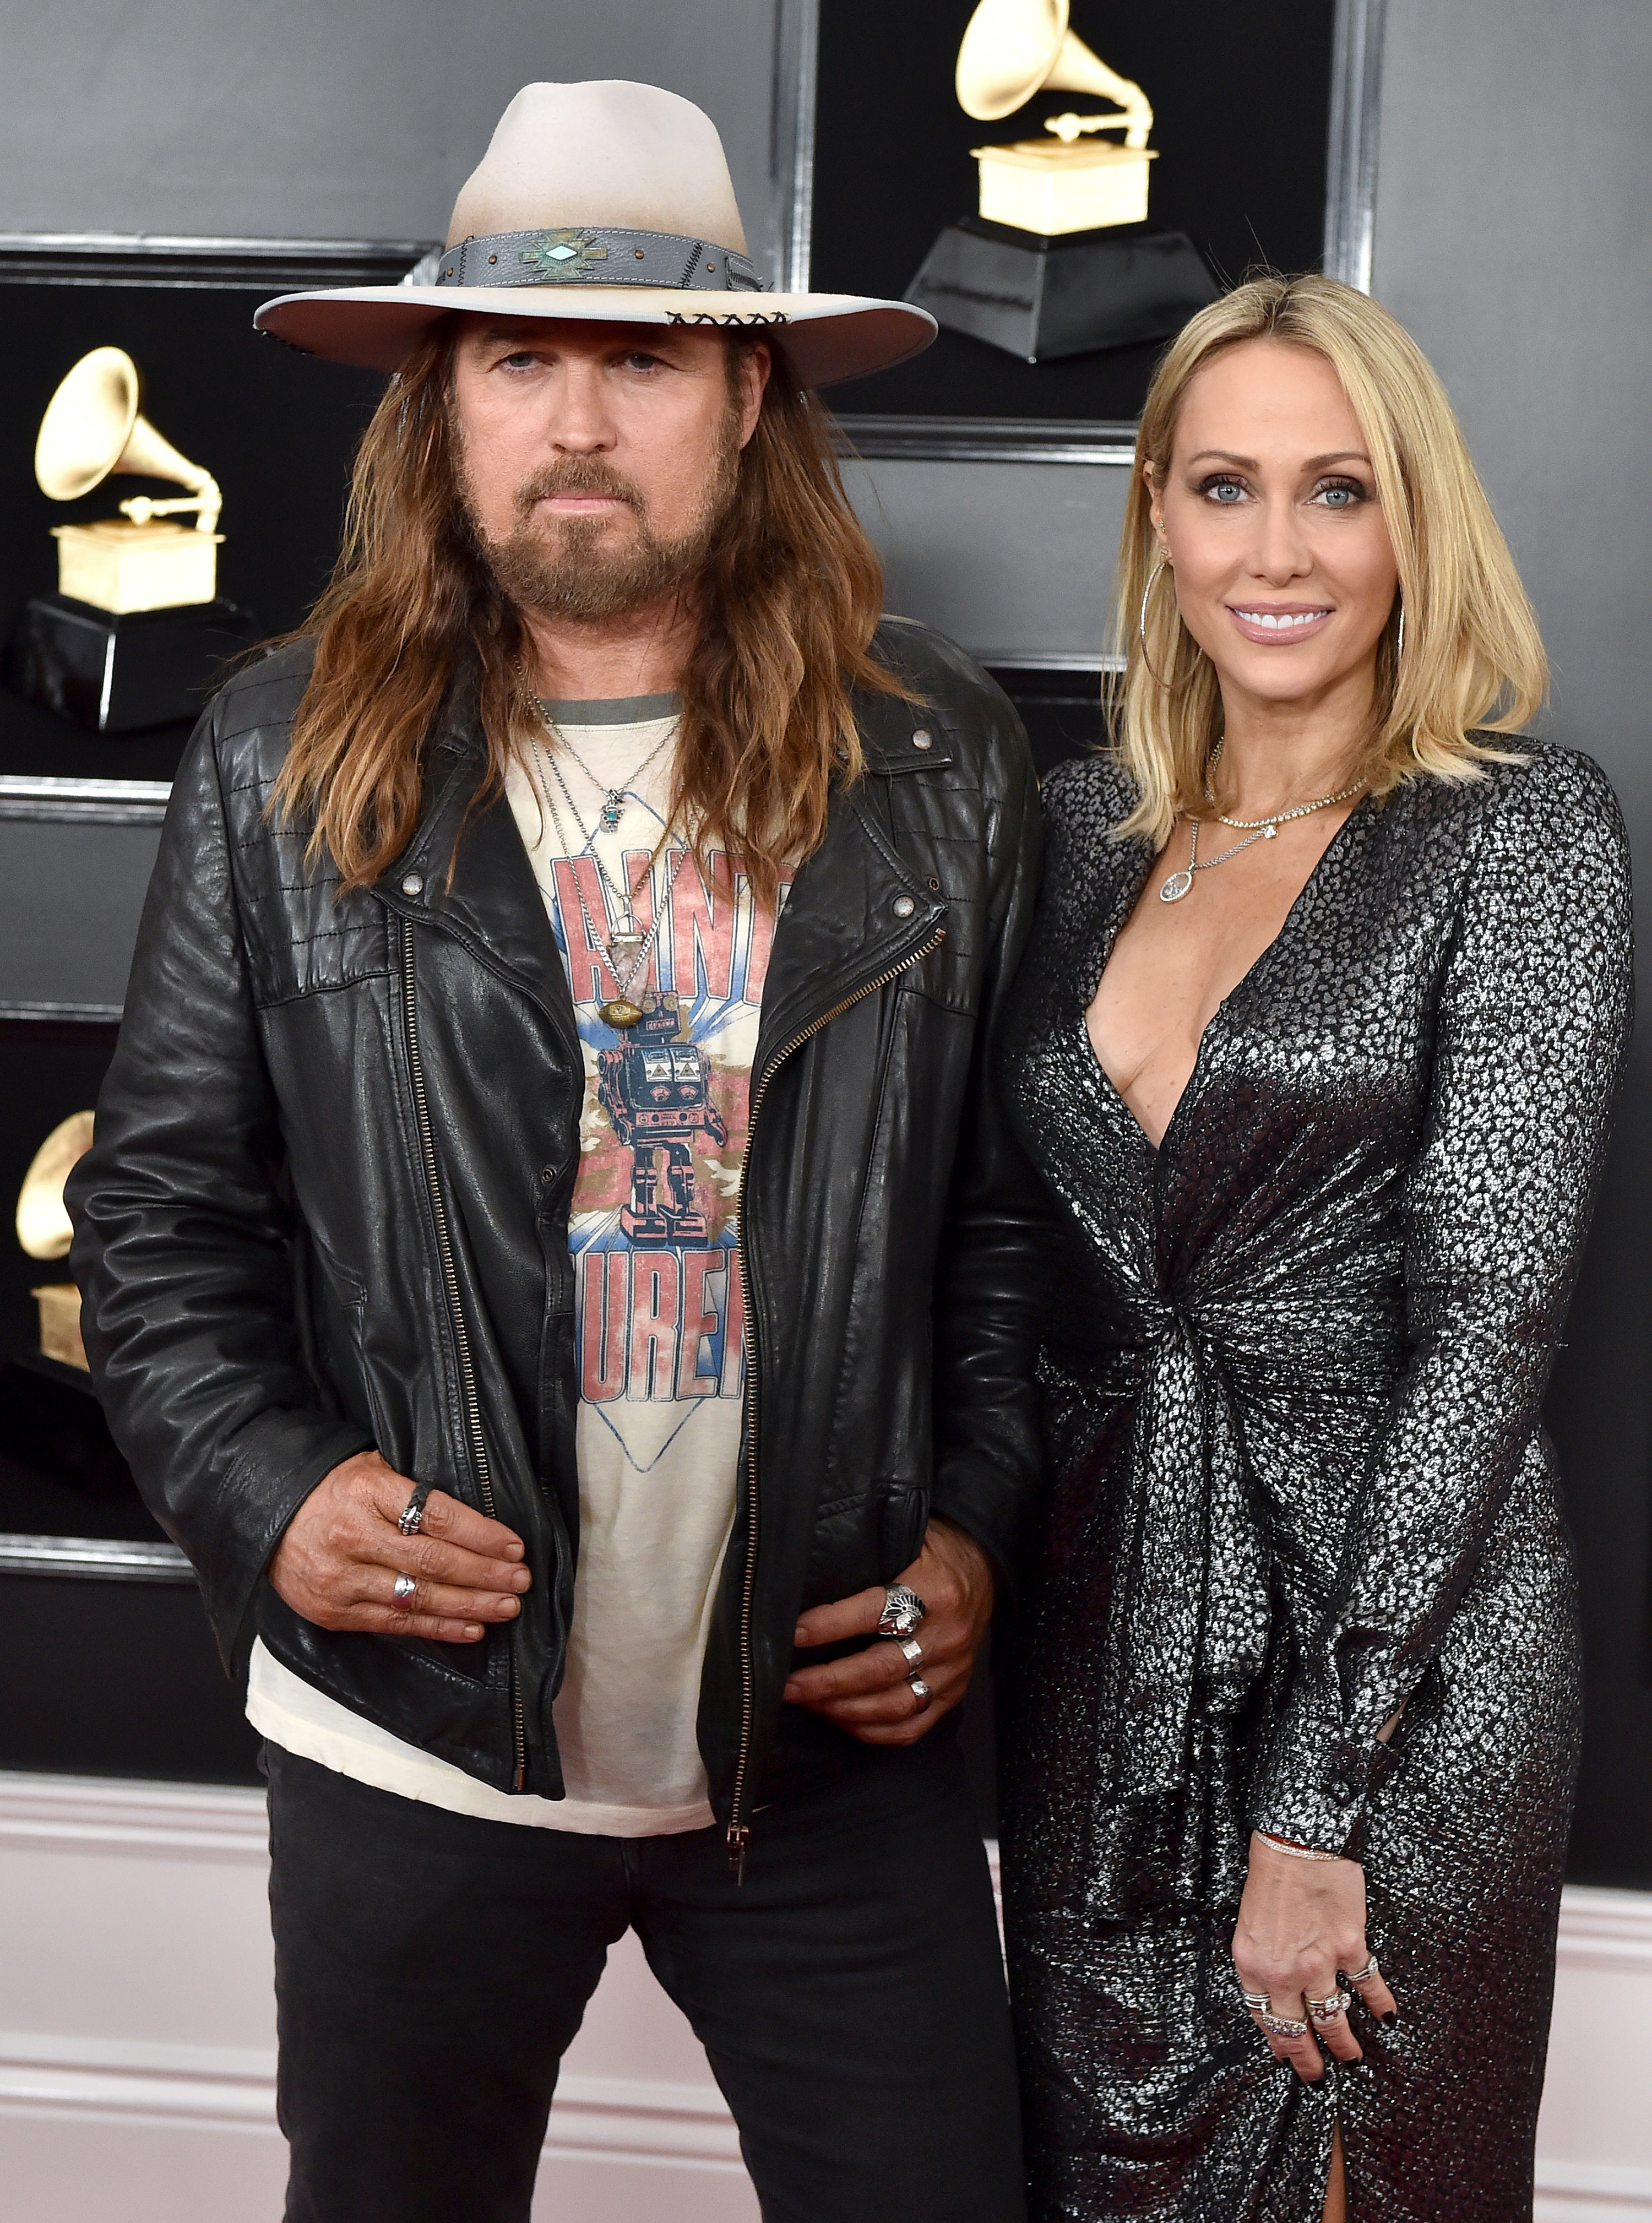 Billy Ray Cyrus and Tish Cyrus are pictured at the 2019 Grammys